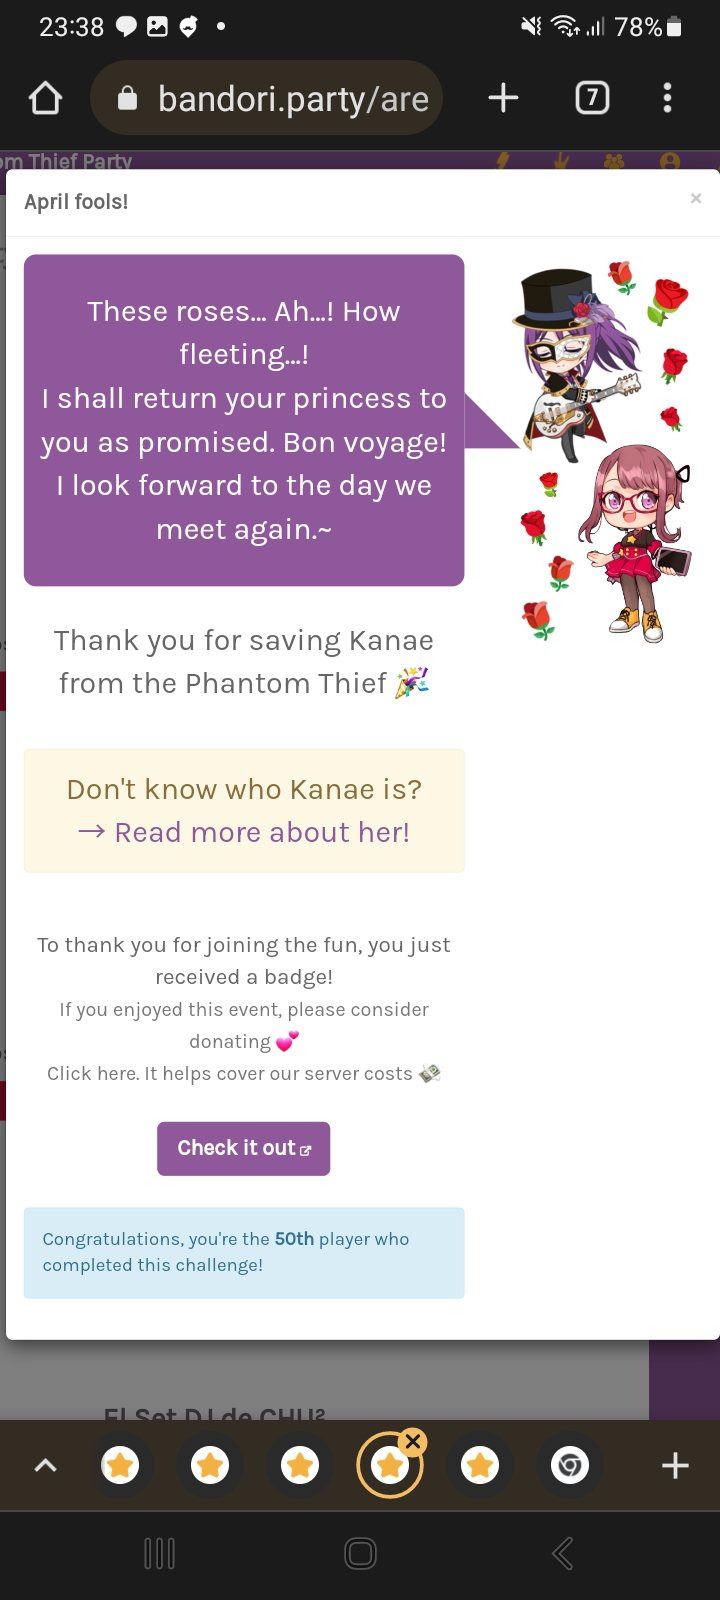 Ouh yeah, returning to Bandori Party for April Fools  it wasn't planned, some hours ago I remembered...